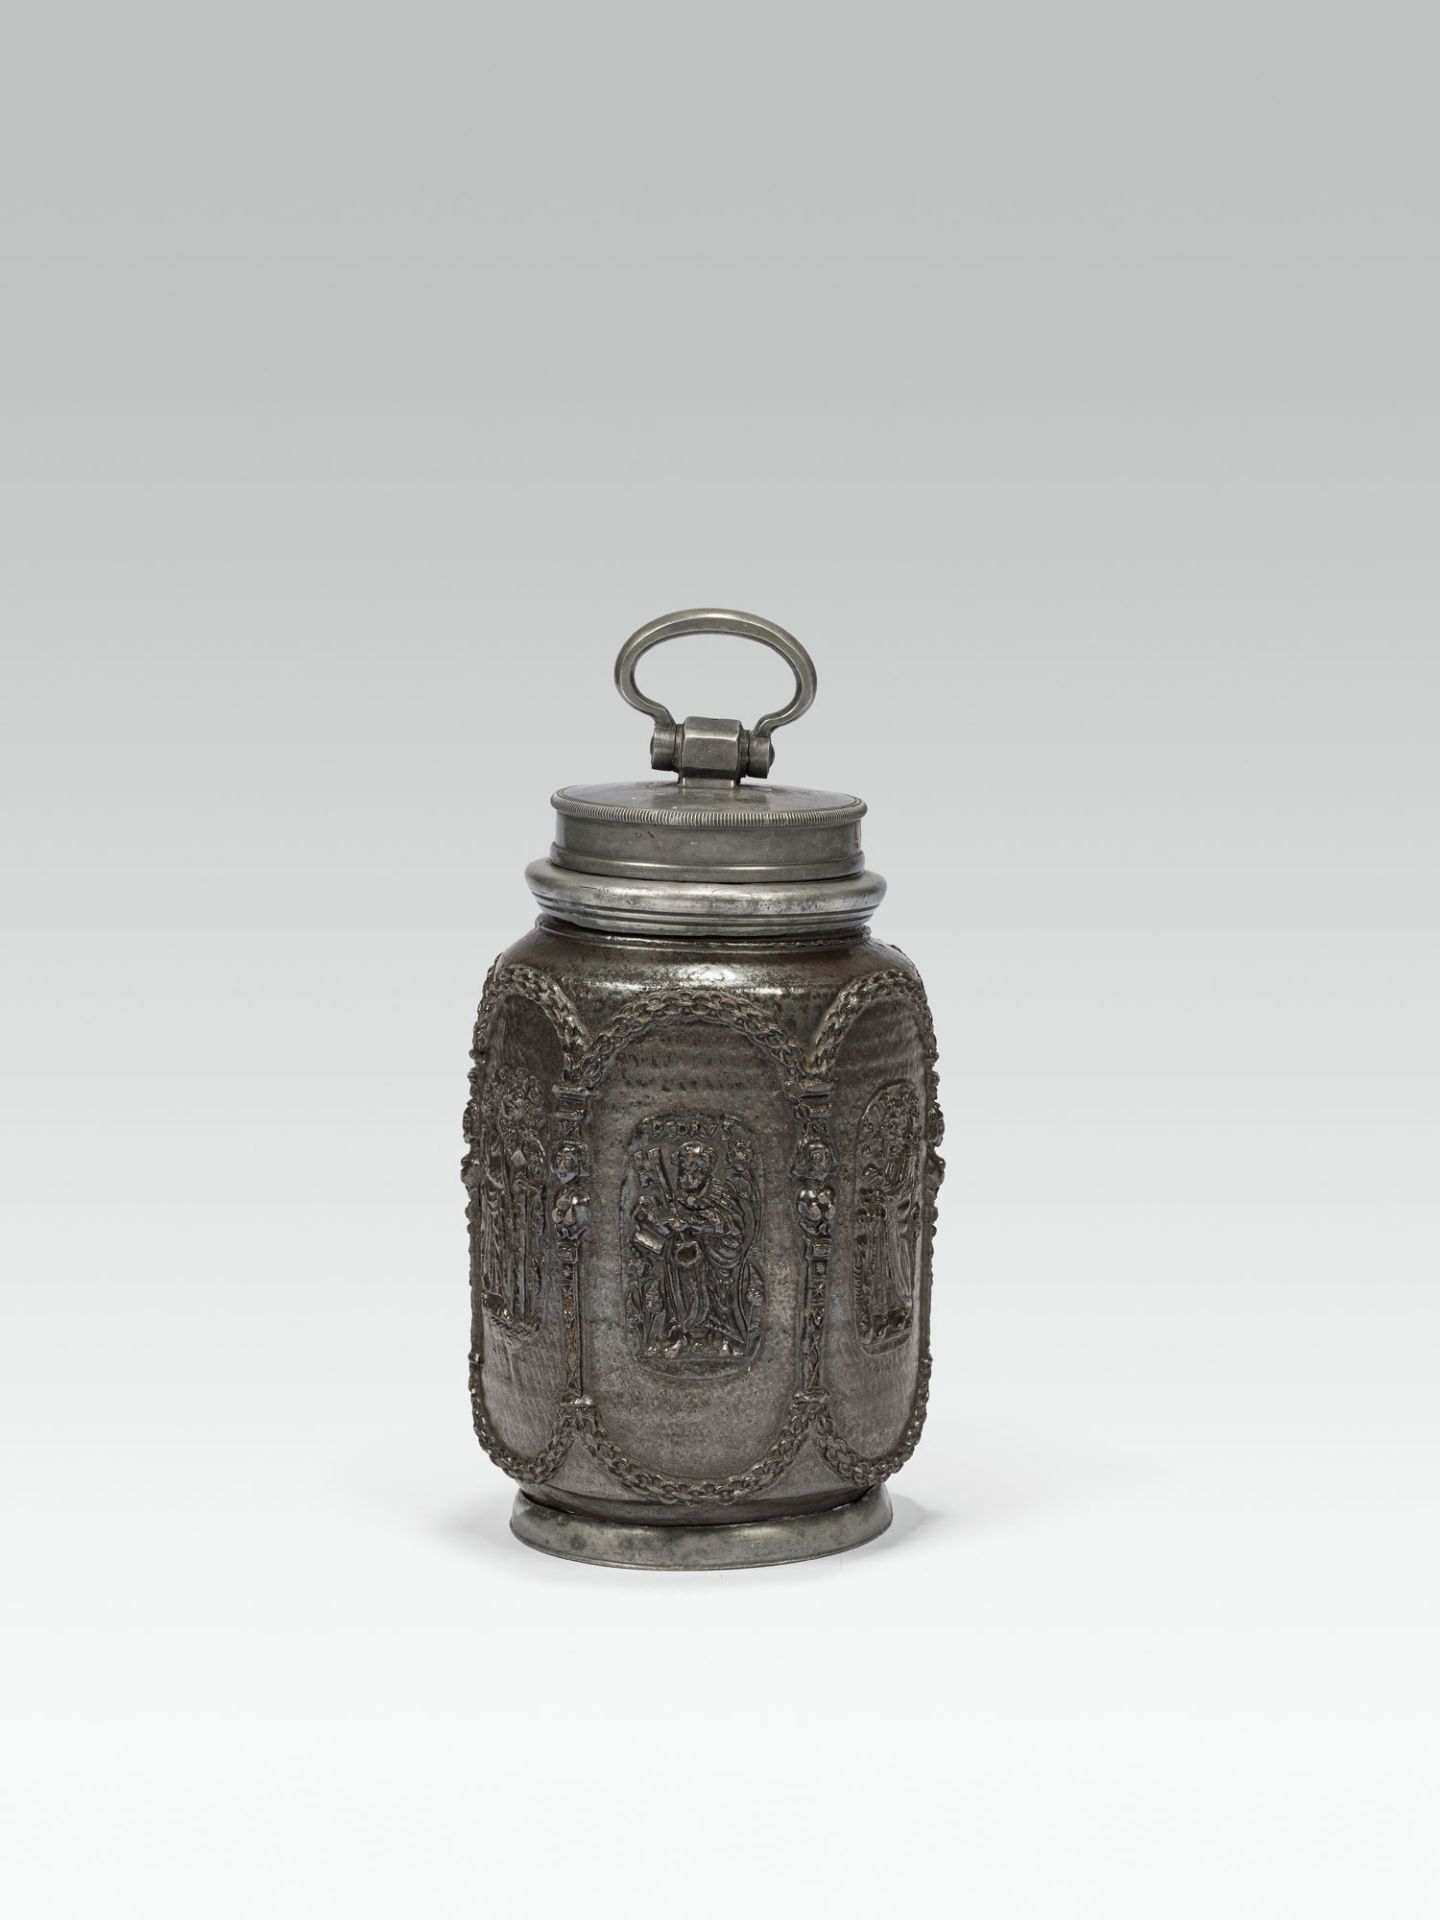 Large bottlestoneware, glazed; cylindrical walling with relief décor; inscribed: "PEDRUS", "S.